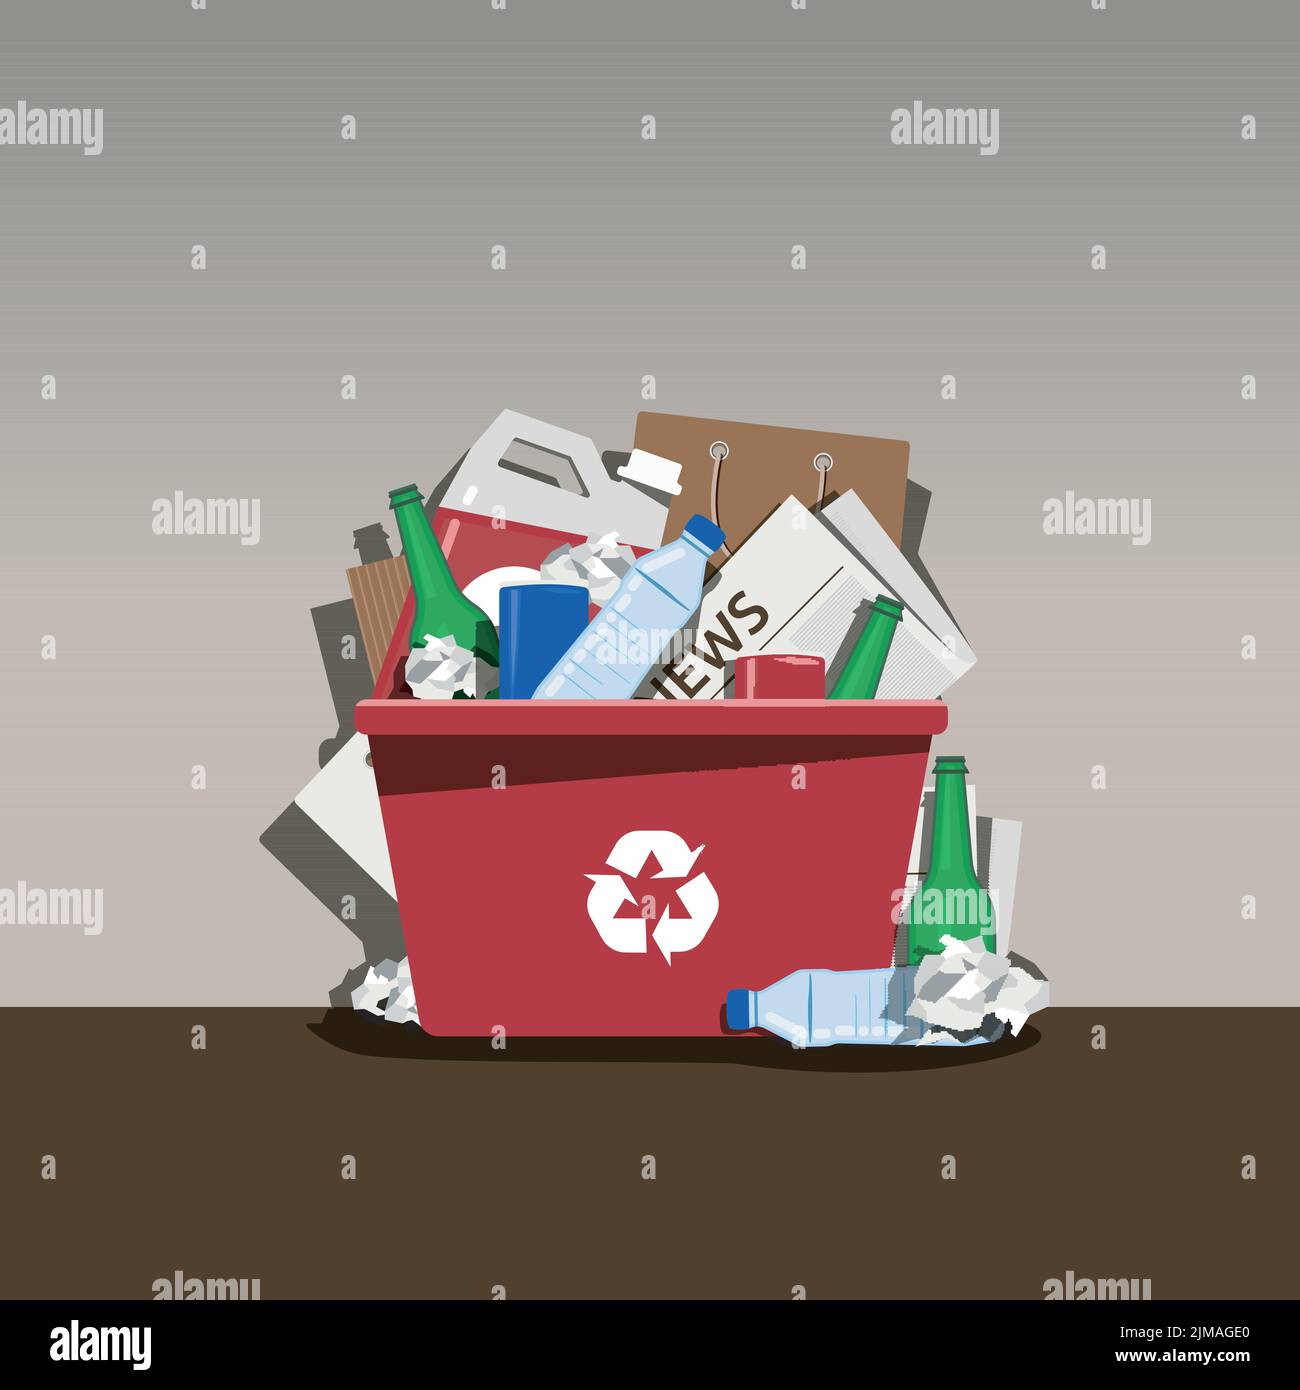 Recycling at Home Waste Shorting Concept Background Stock Vector